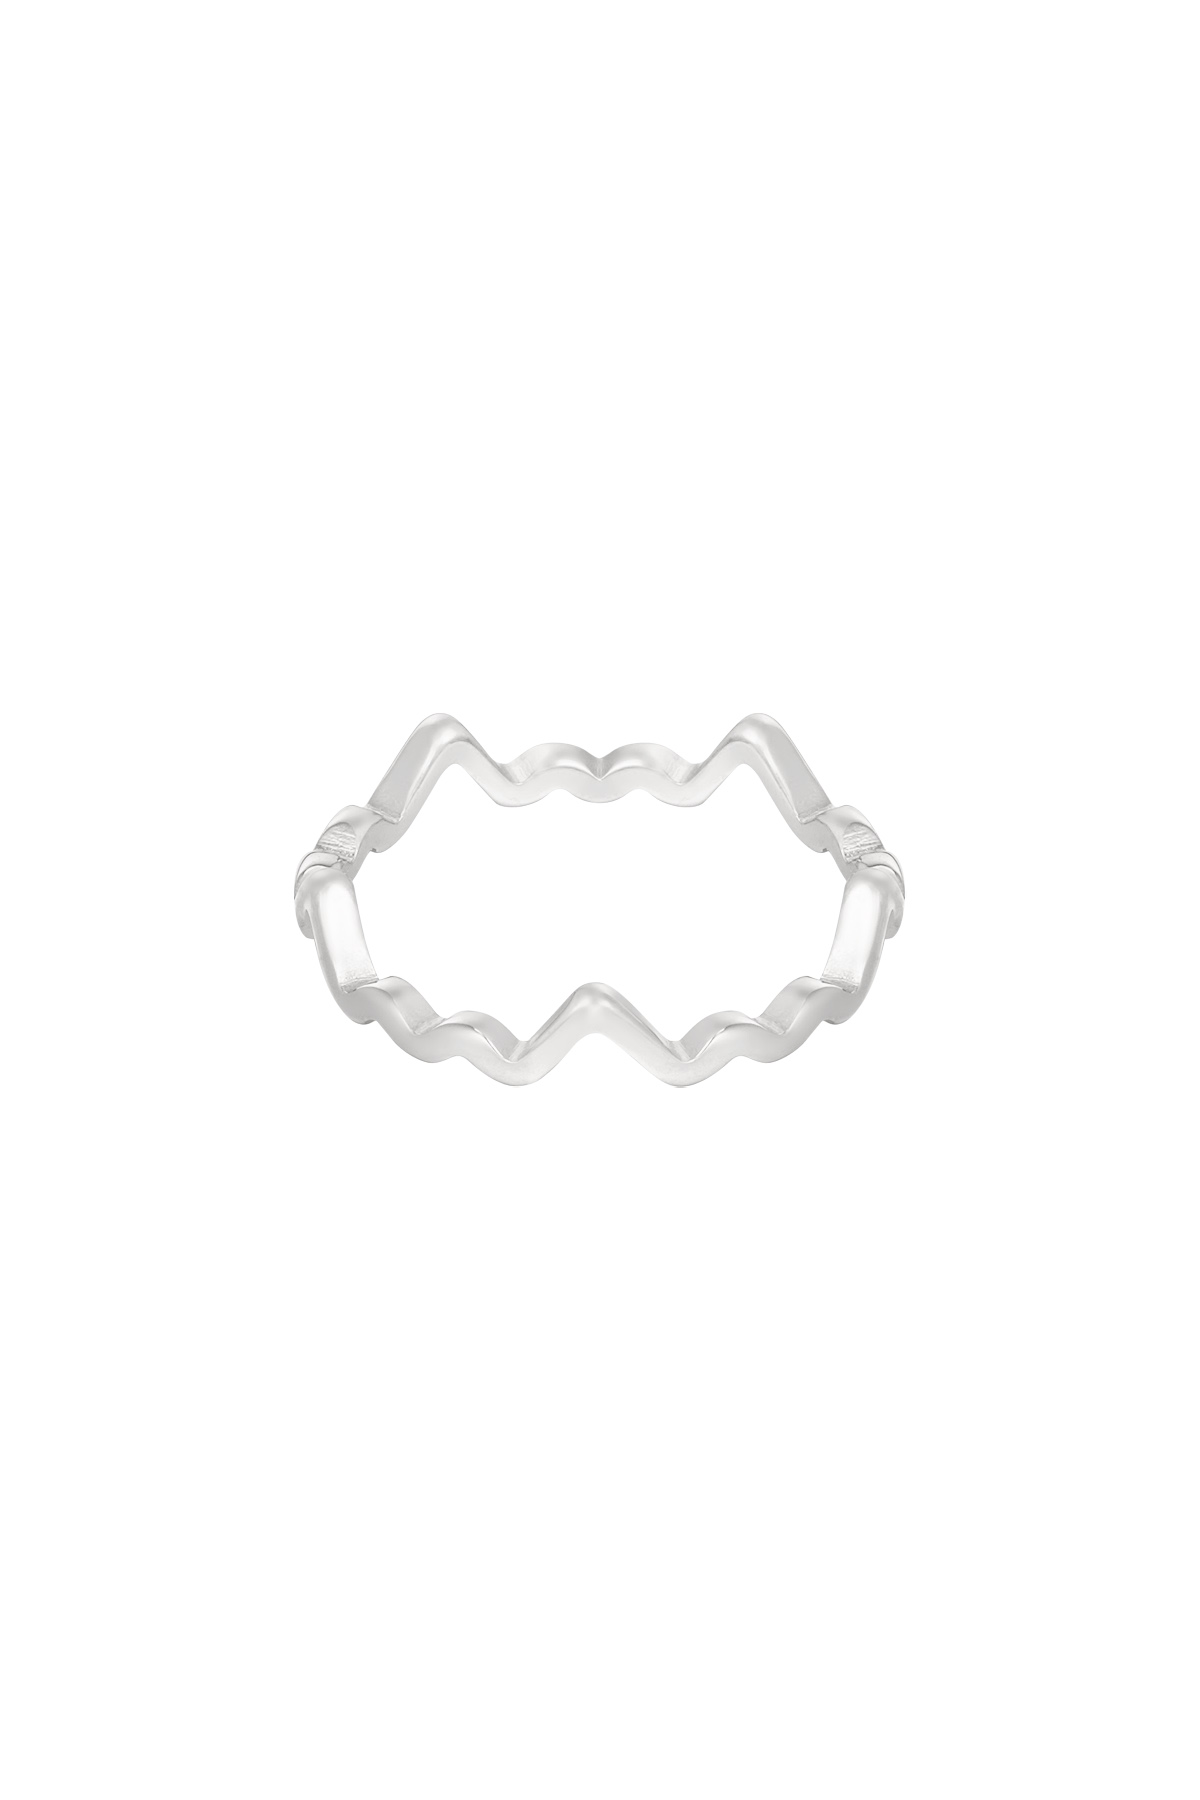 Ring aesthetic - zilver h5 